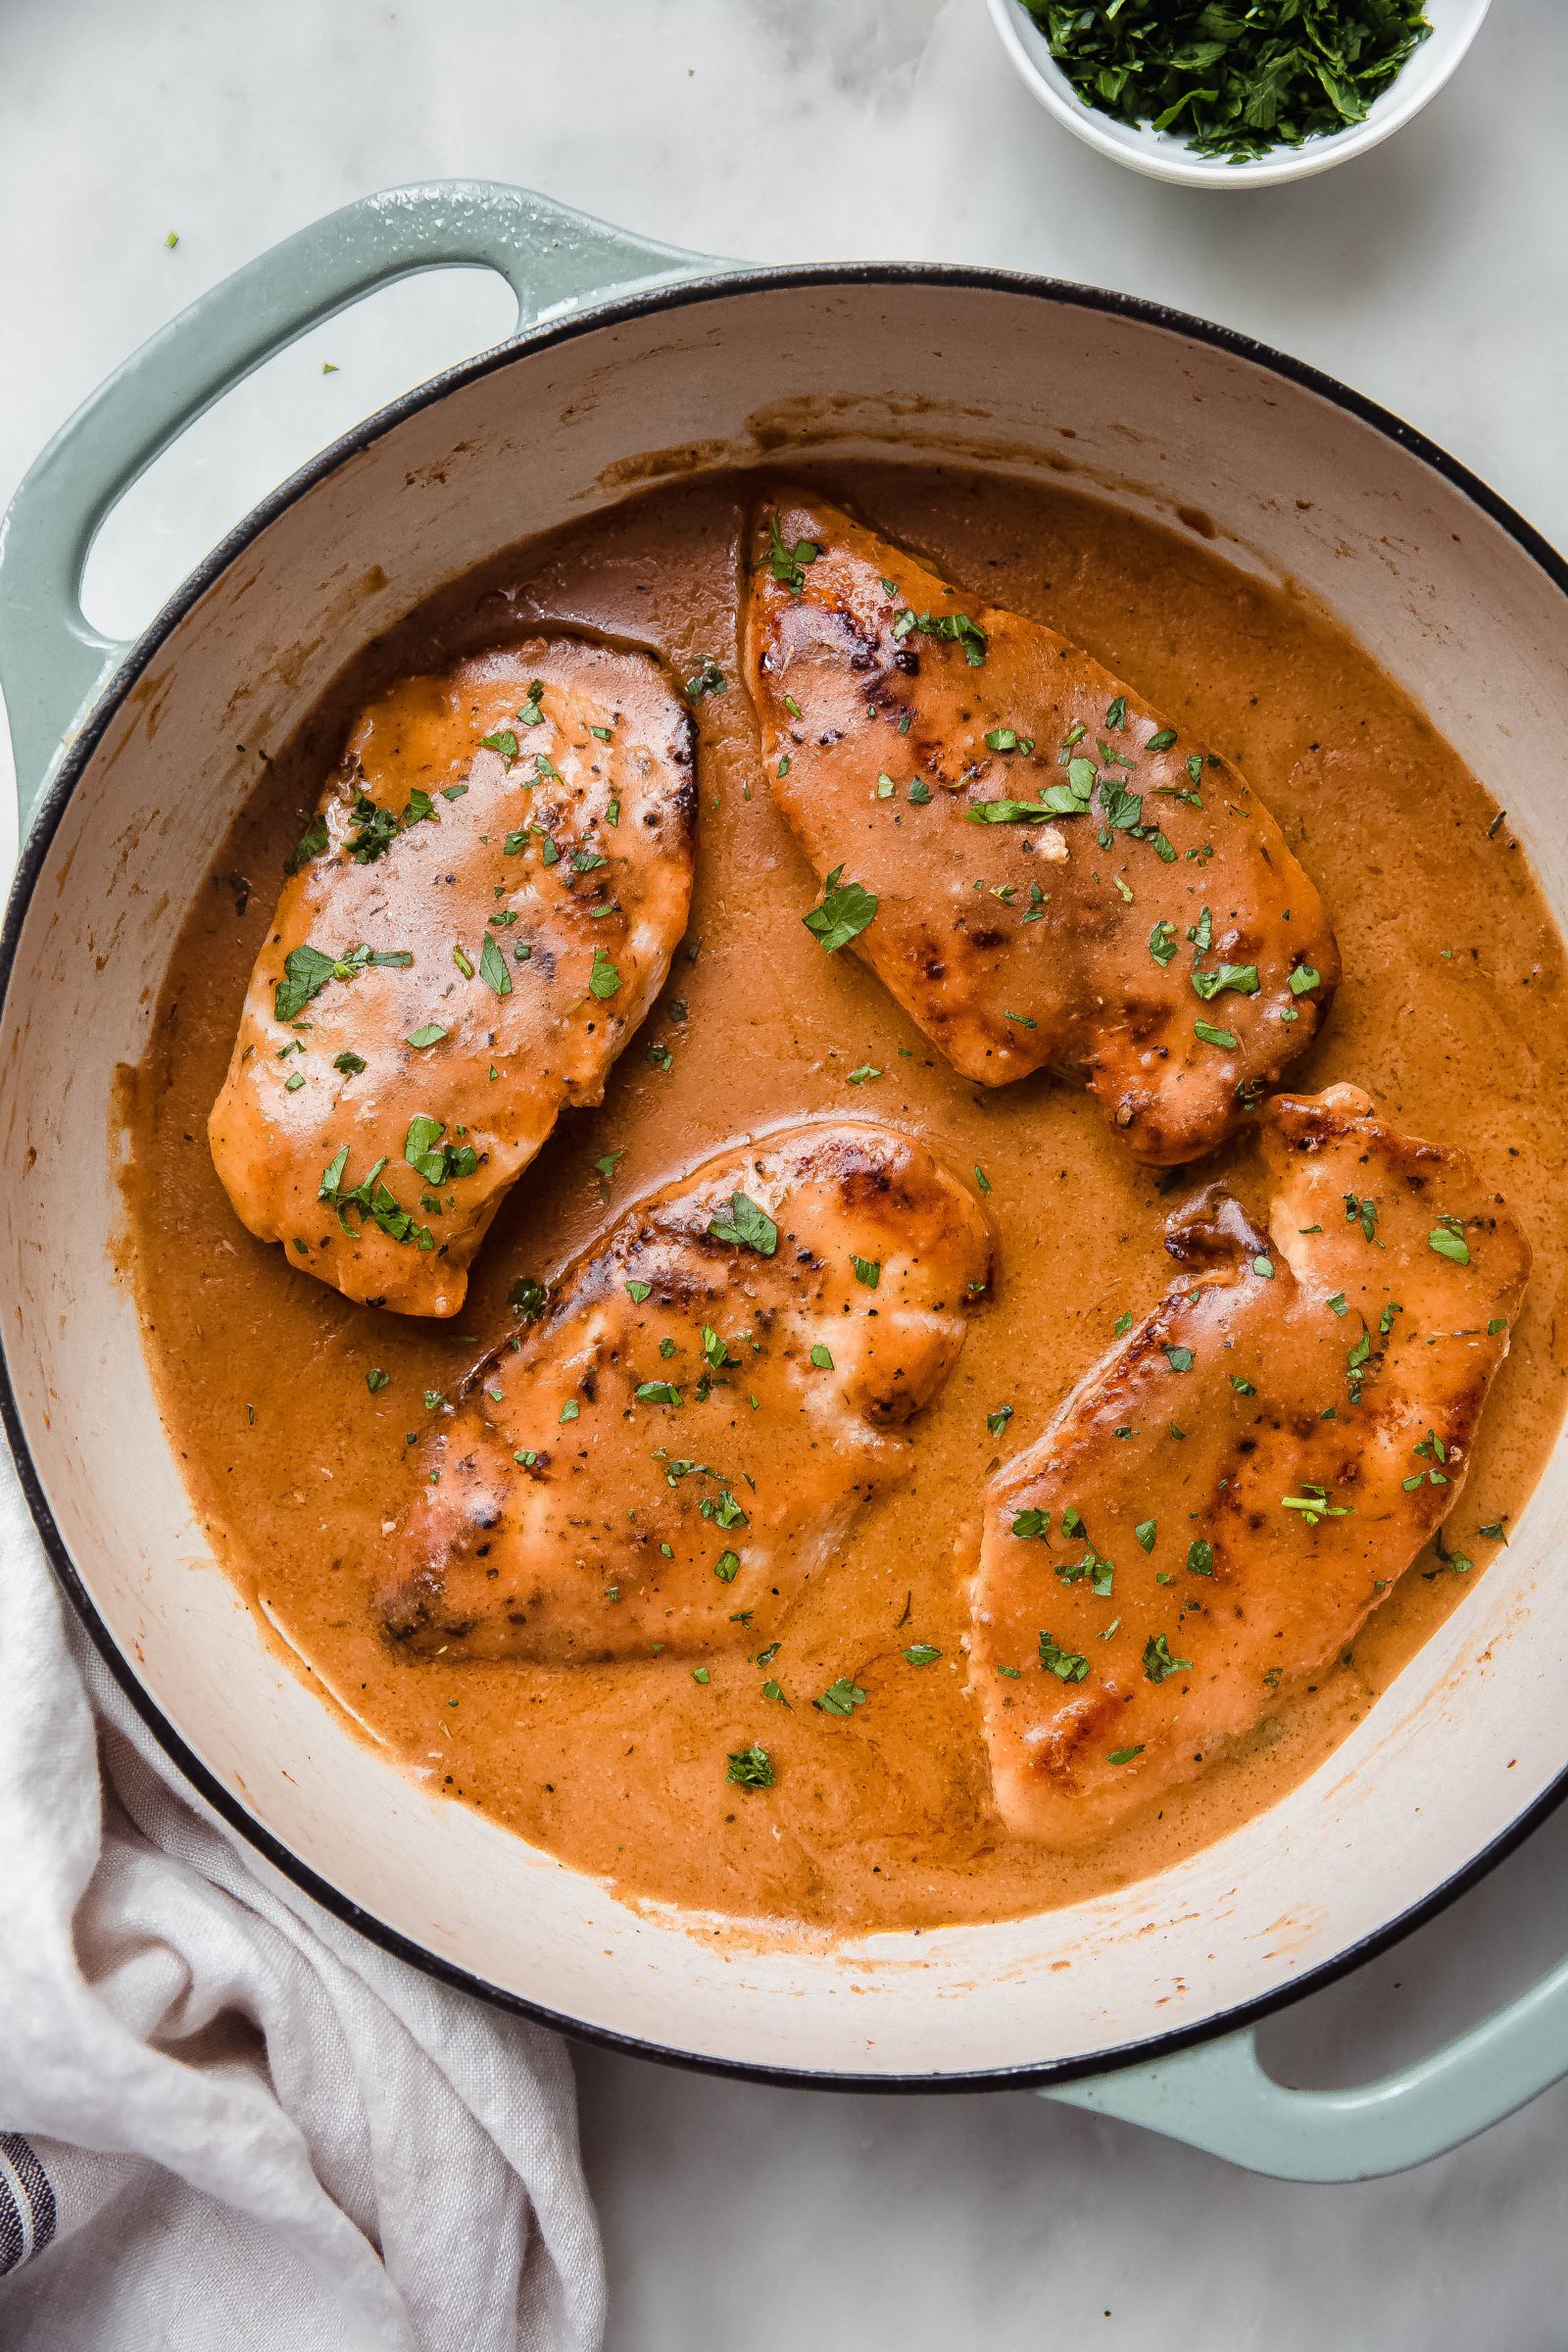 https://littlespicejar.com/wp-content/uploads/2021/04/Smothered-Chicken-with-Gravy-and-Mashed-Potatoes-3.jpg